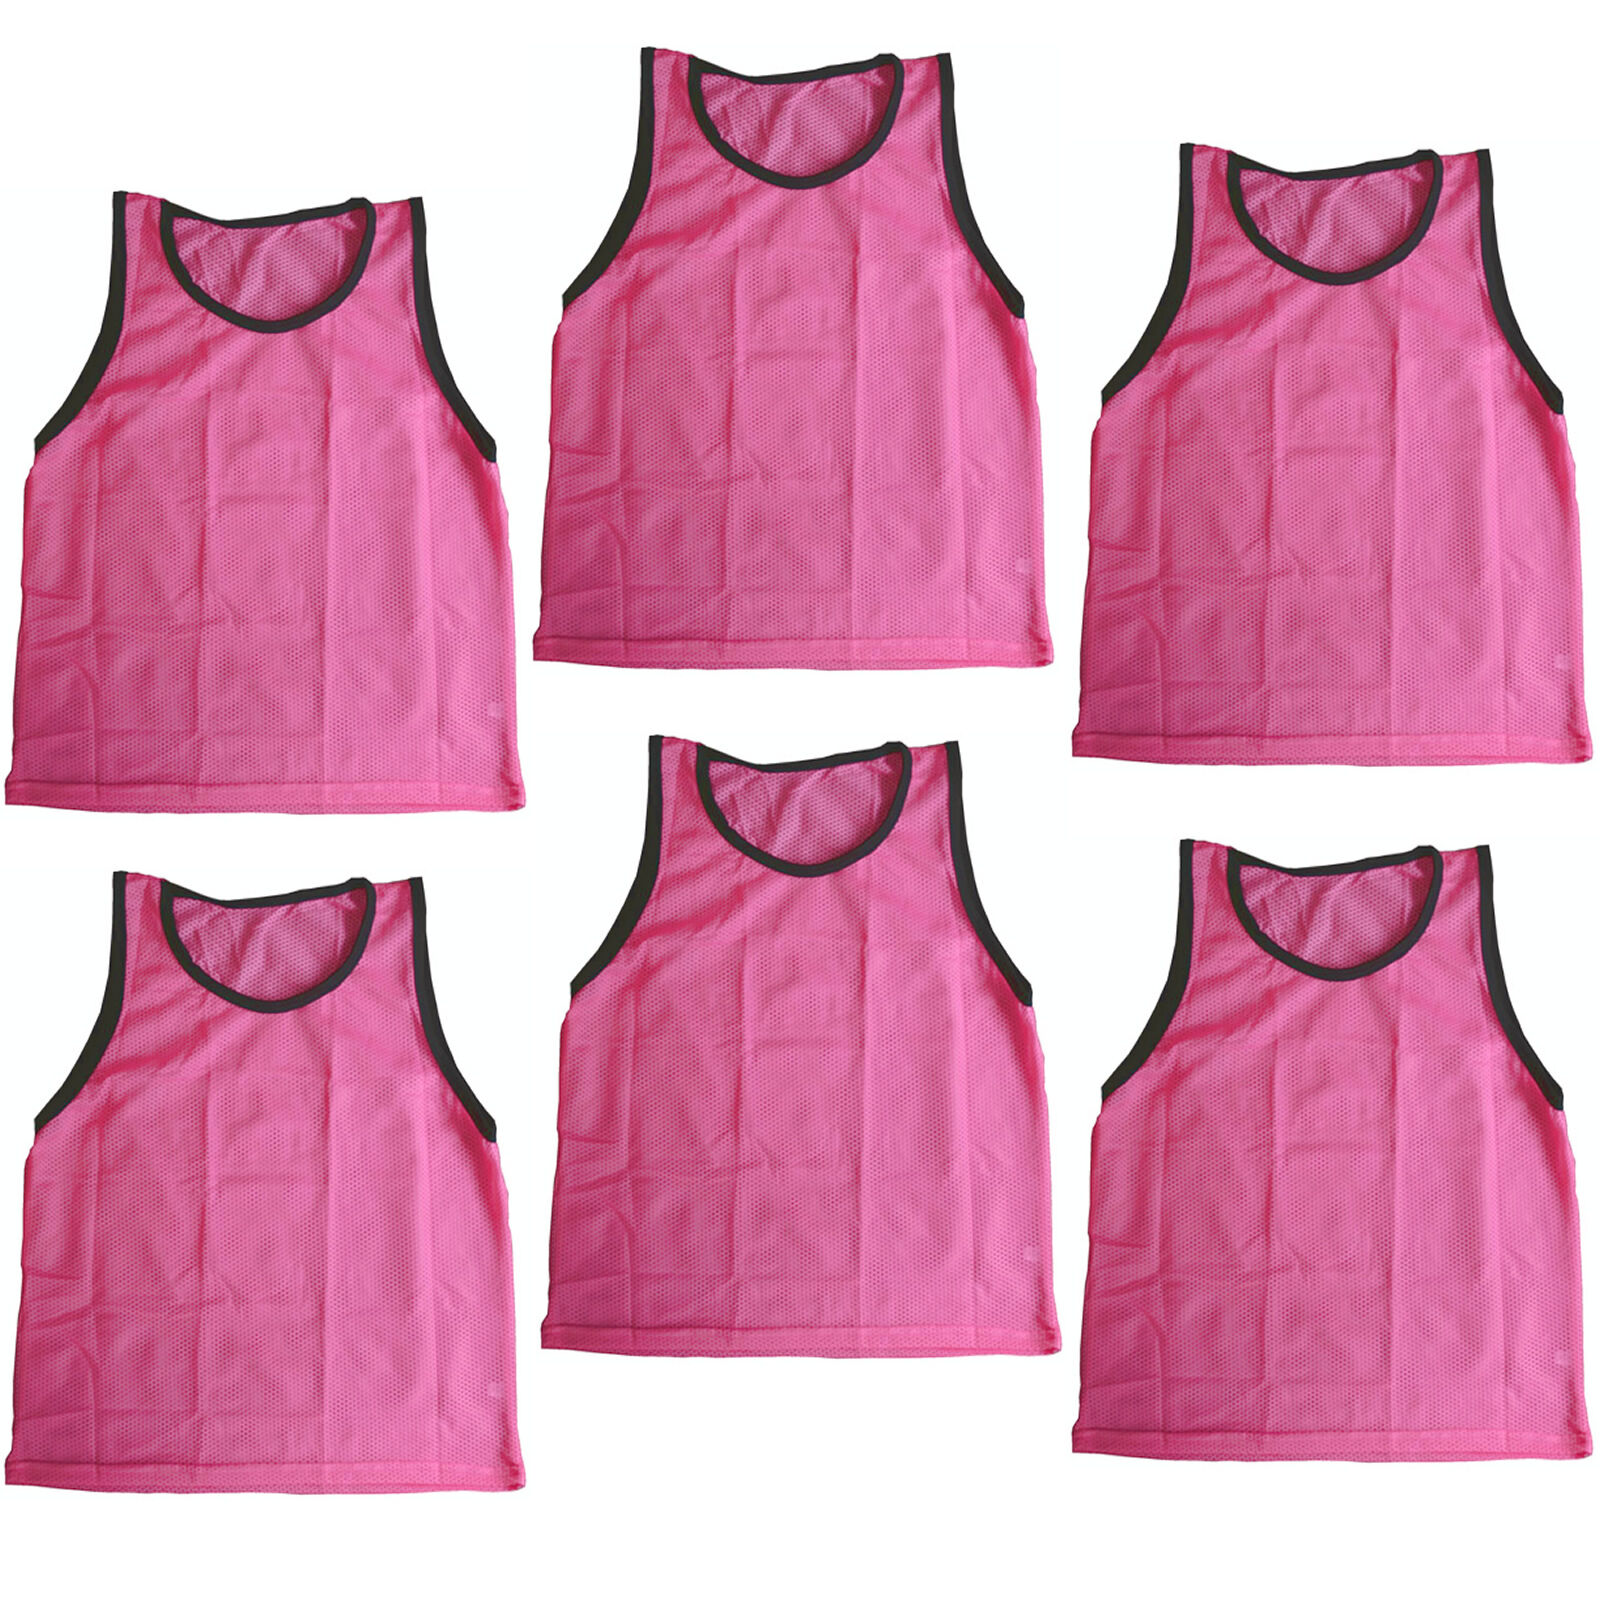 Great Choice Products Set Of 6 Scrimmage Vests Pinnies Soccer Youth Pink New!